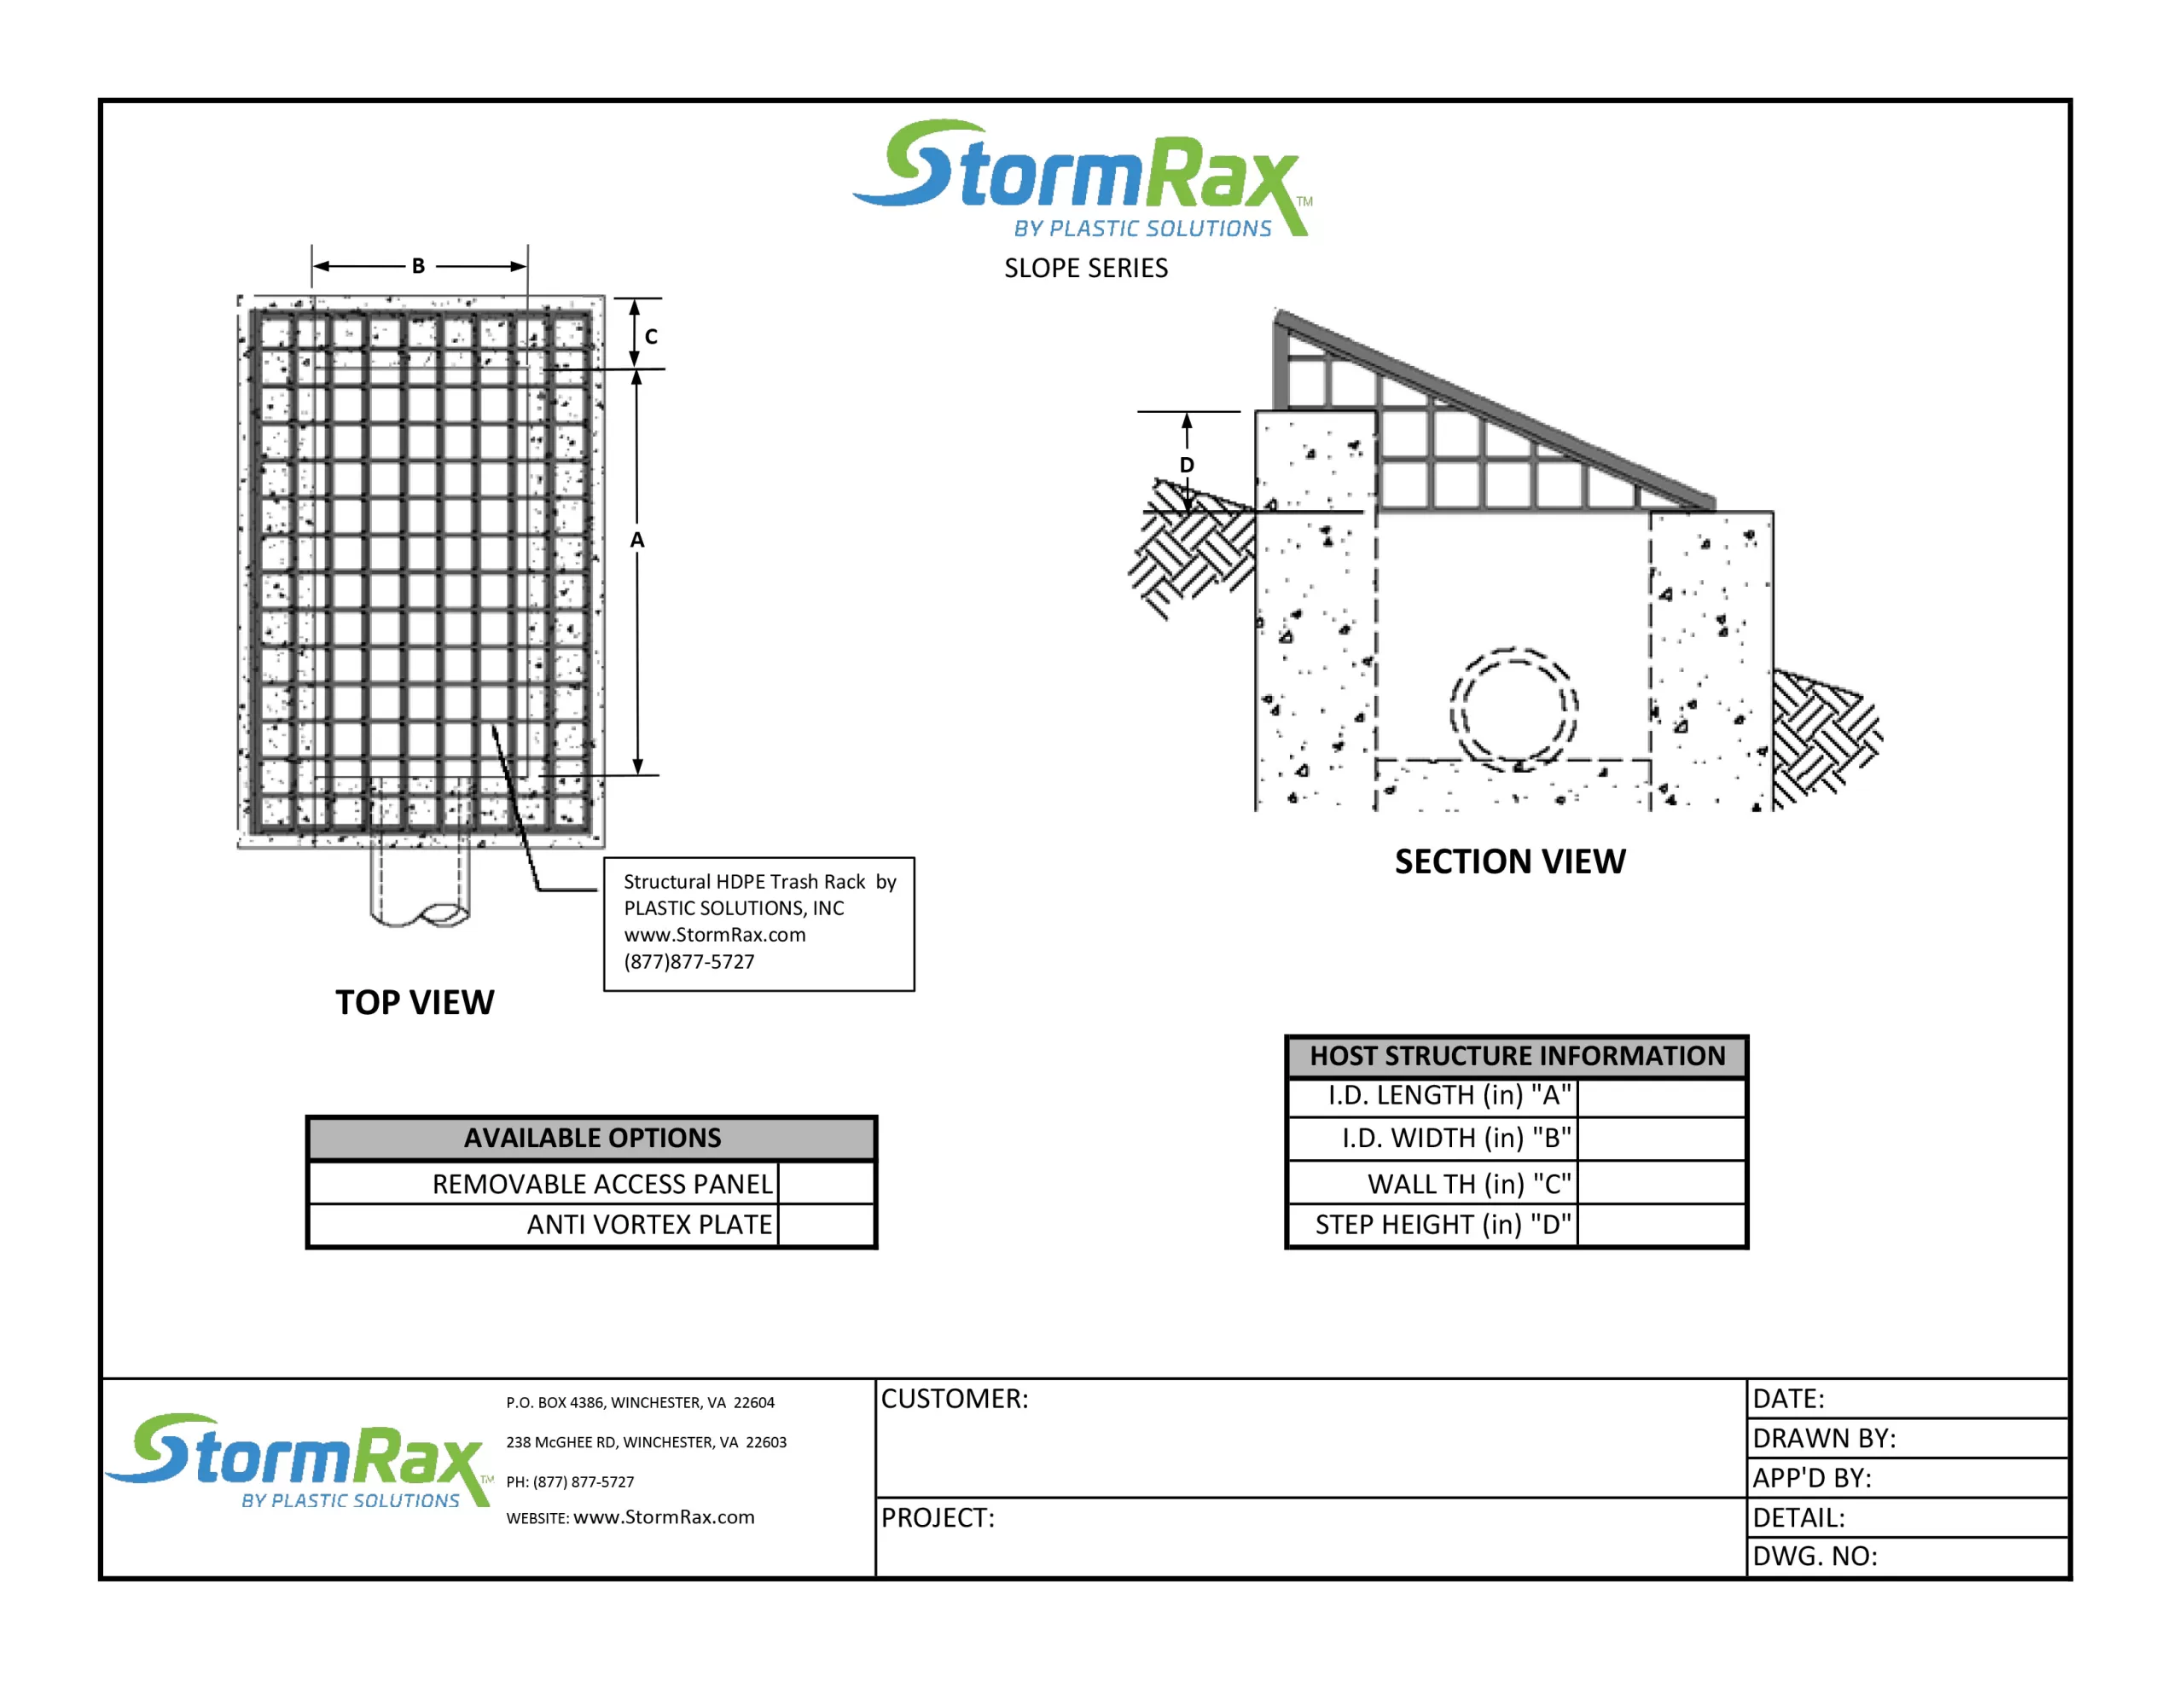 Technical drawing for stormrax slope series